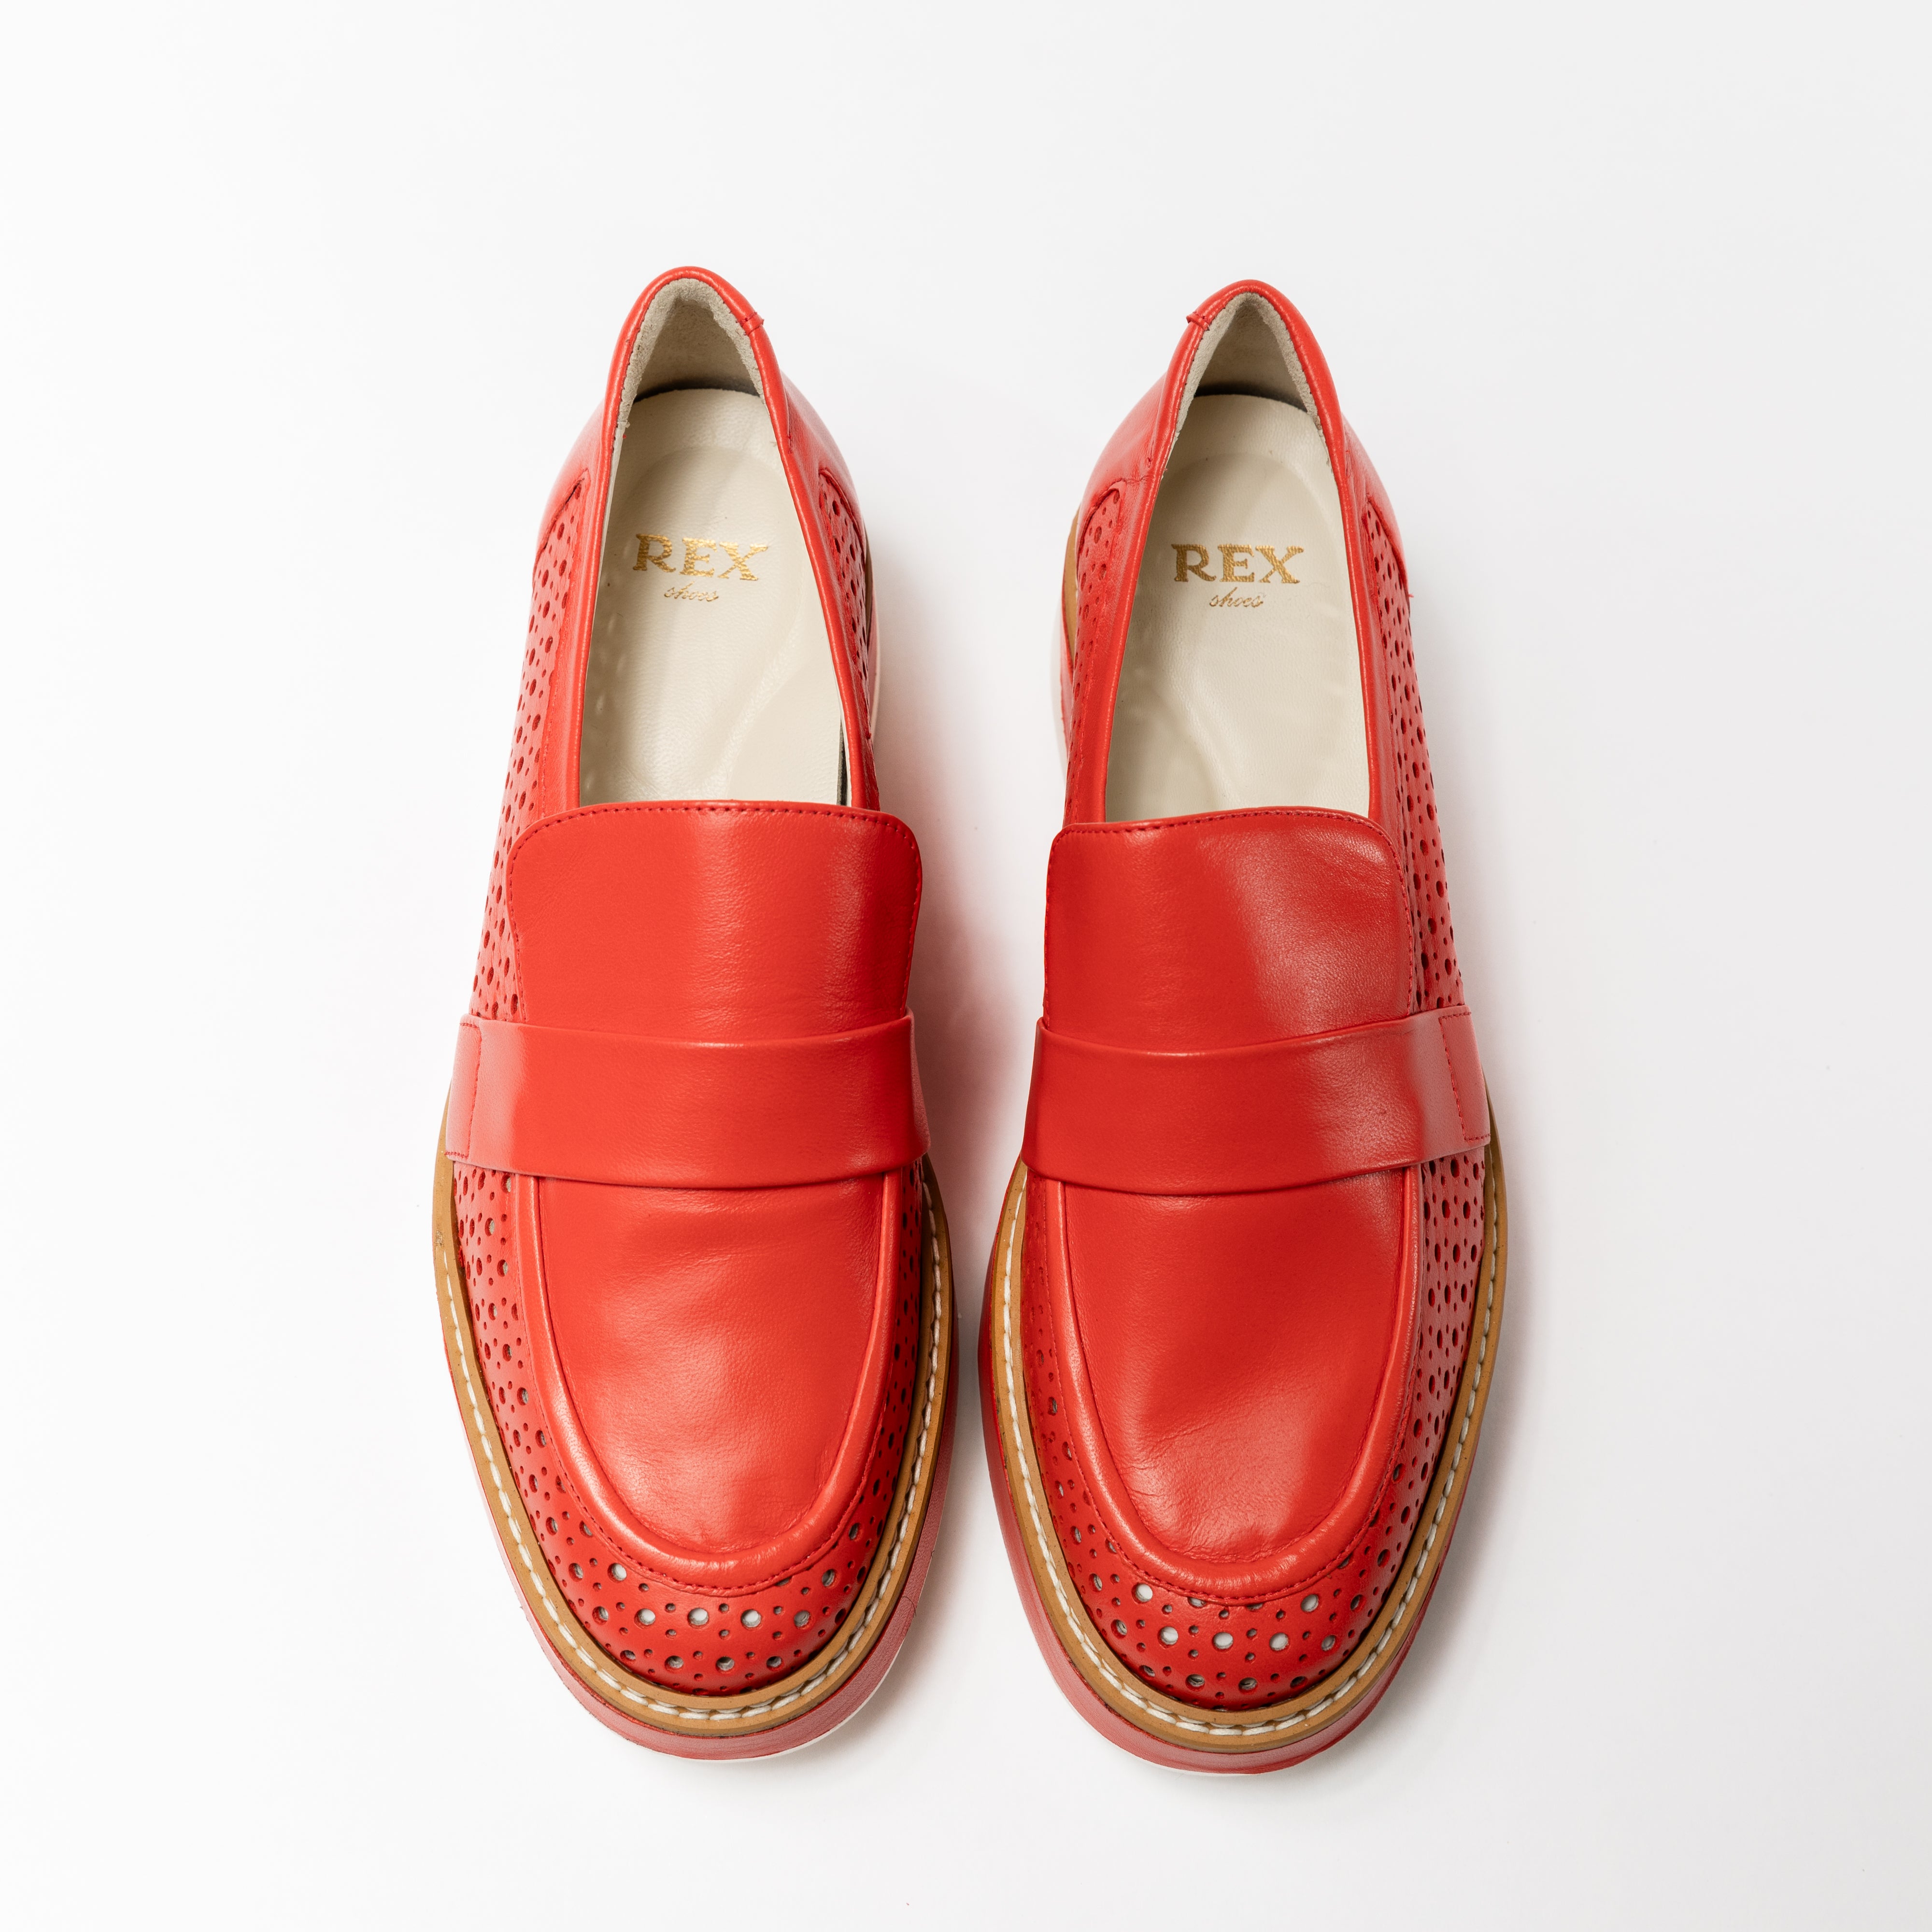 Top view of the Rex Shoes&#39; women&#39;s designer loafer, displaying the exquisite vamp and precision of the handcrafted leather construction.